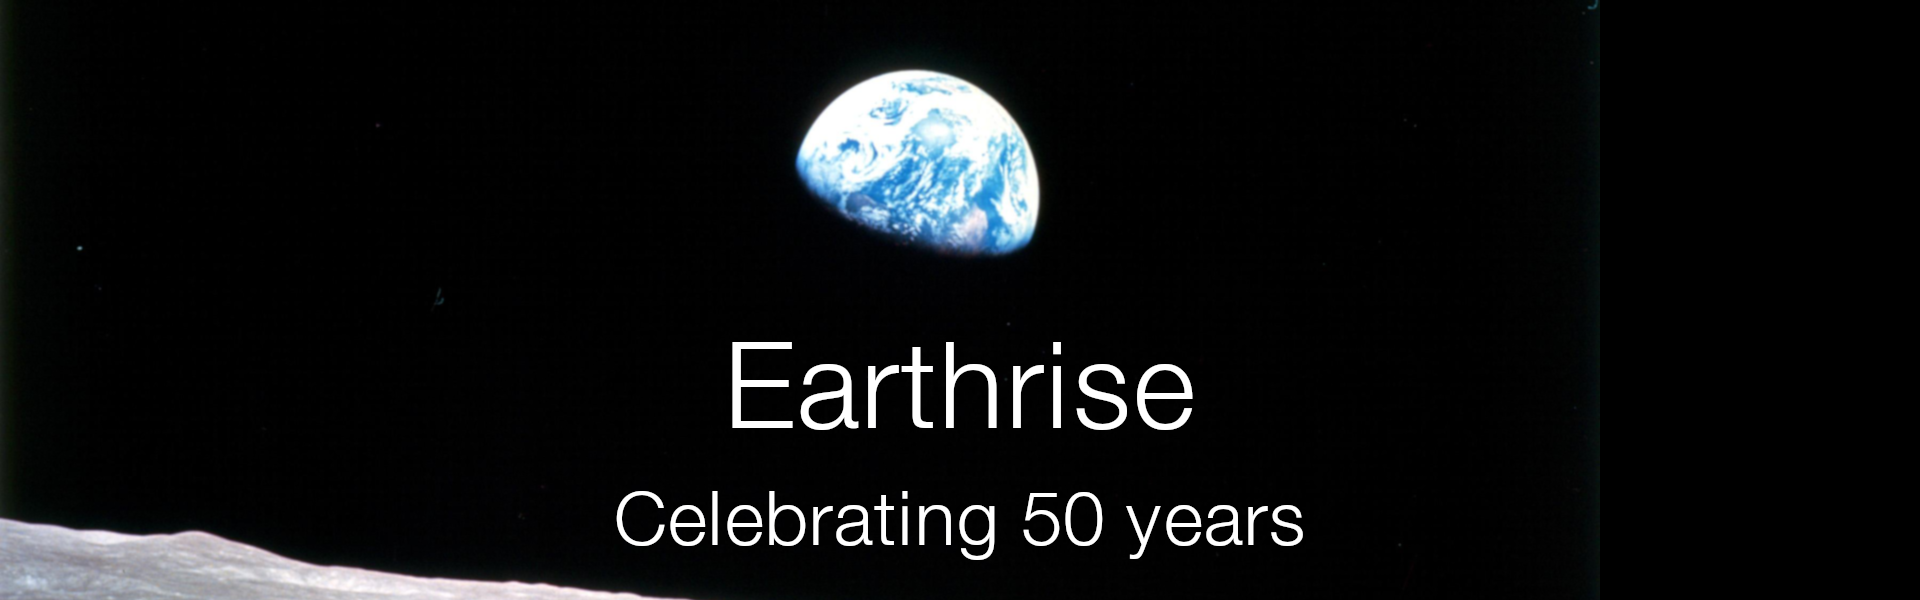 Earthrise: Looking Back On Our Planet